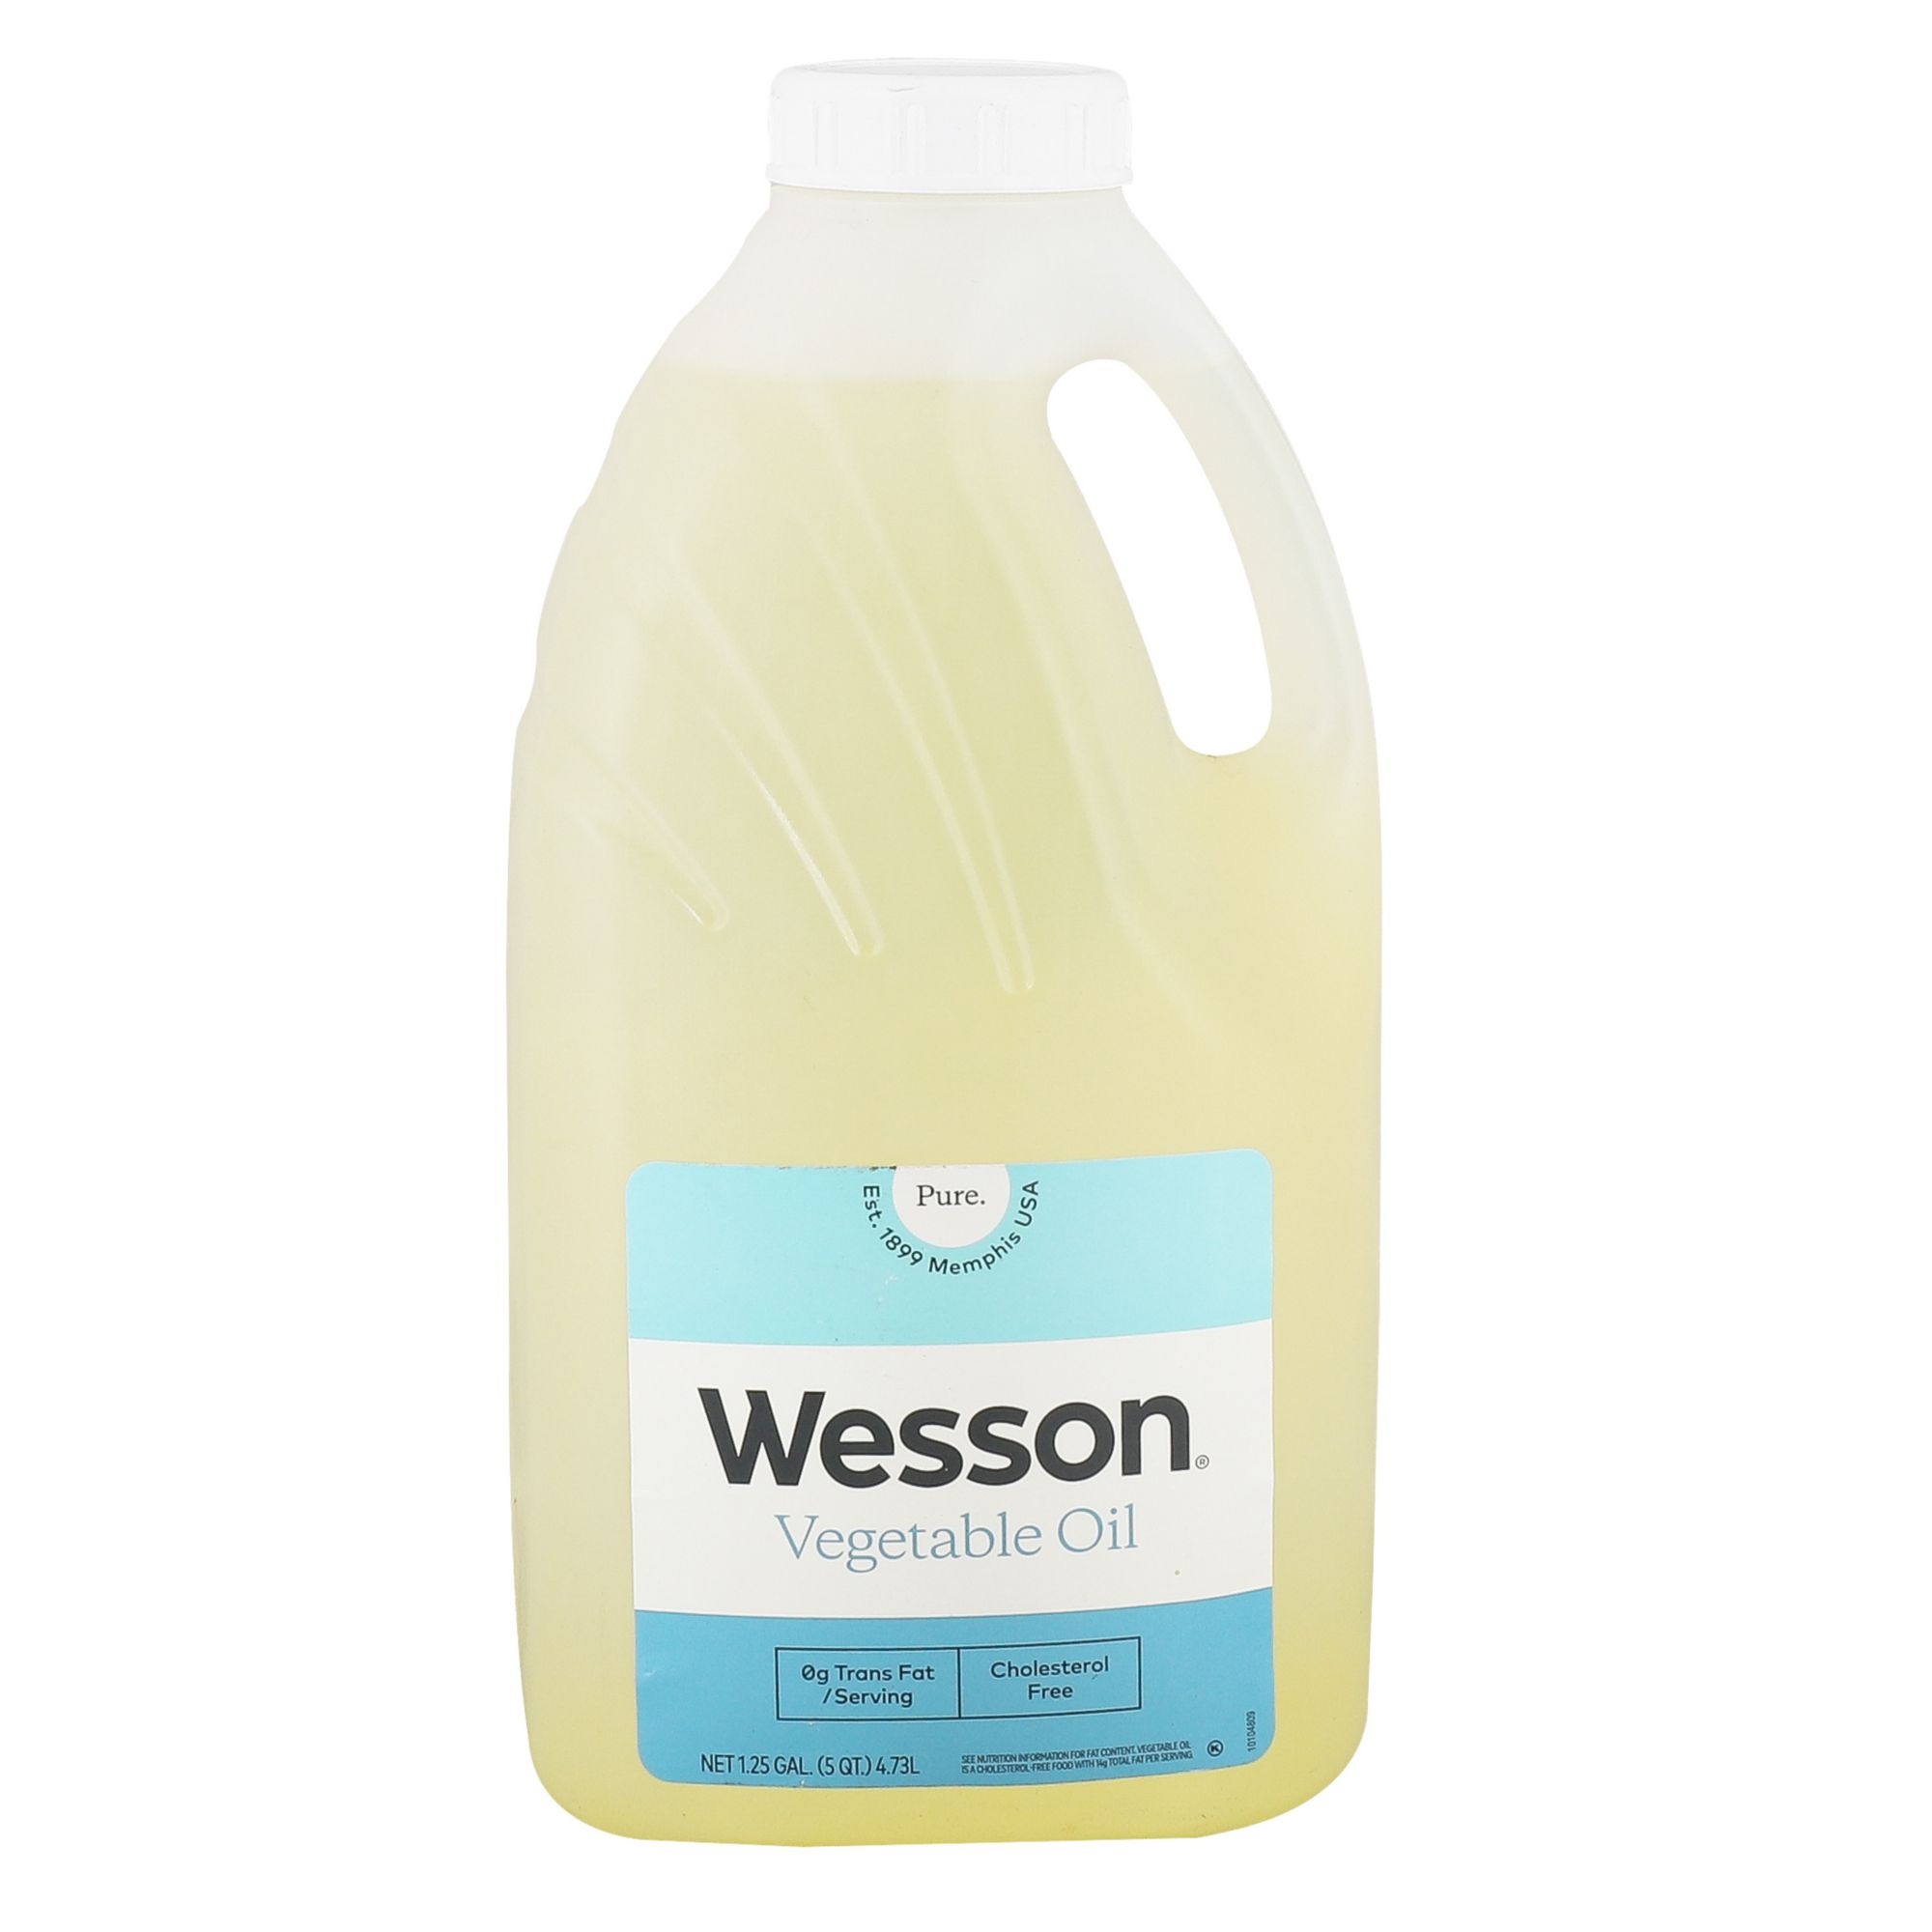 Wesson Pure Vegetable Oil 5 qts.